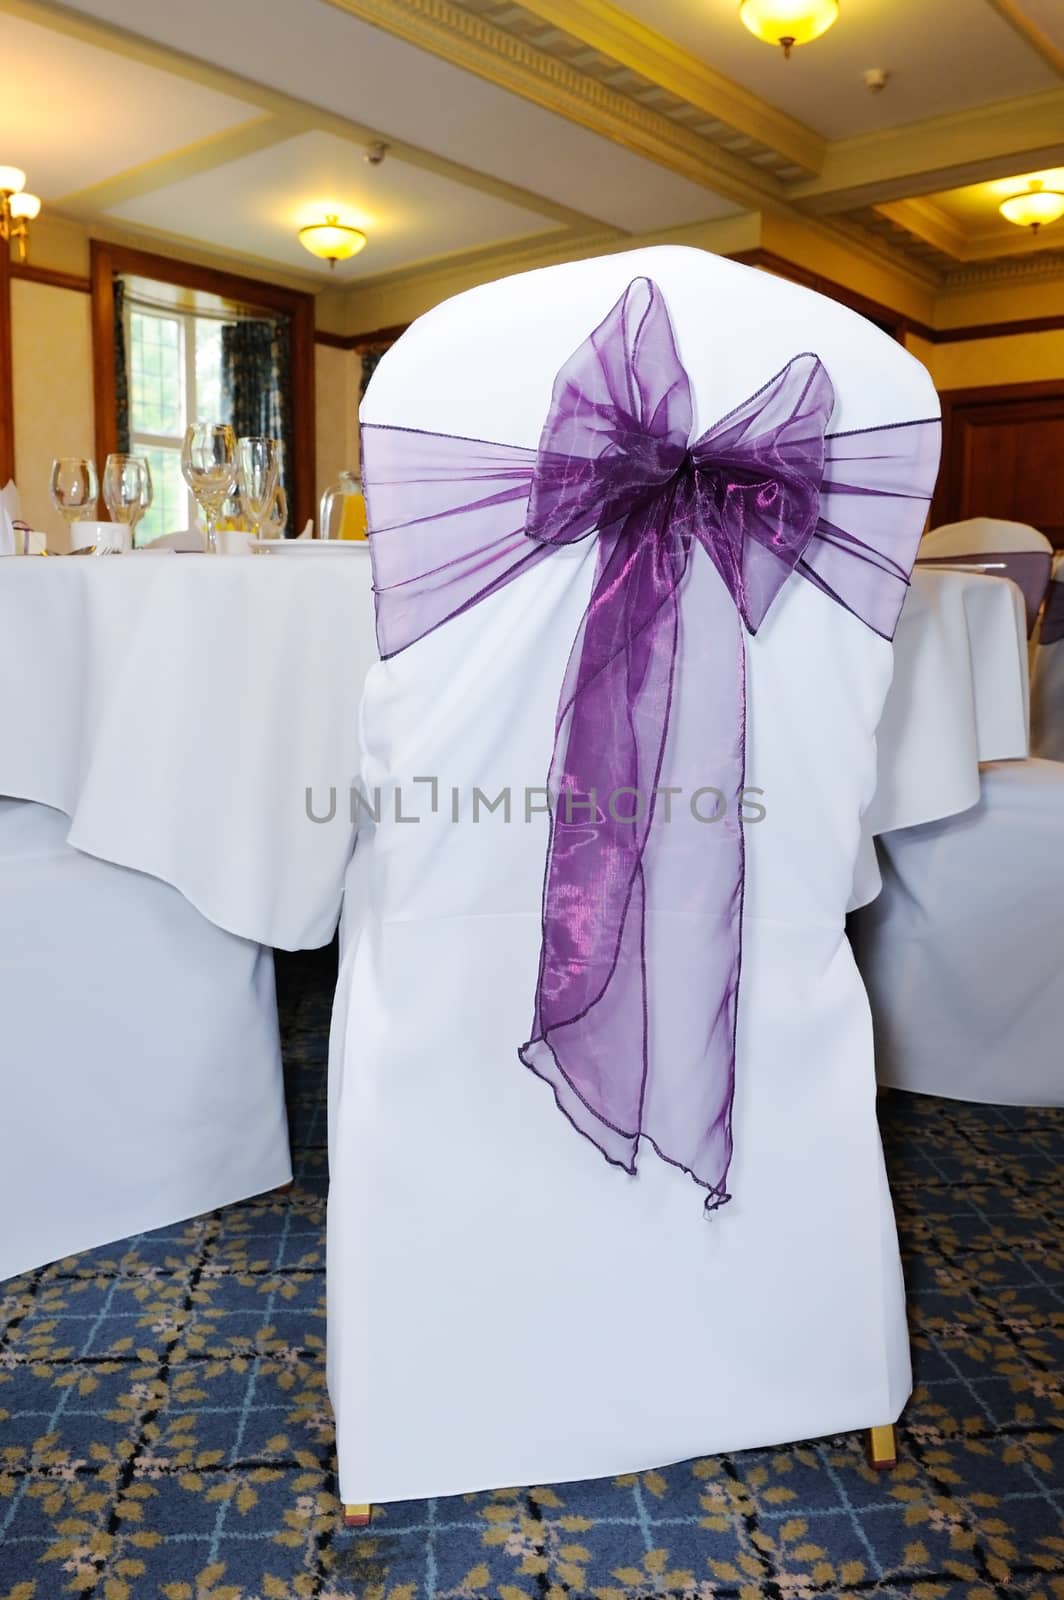 White chair at wedding reception decorated with purple ribbon tied in bow